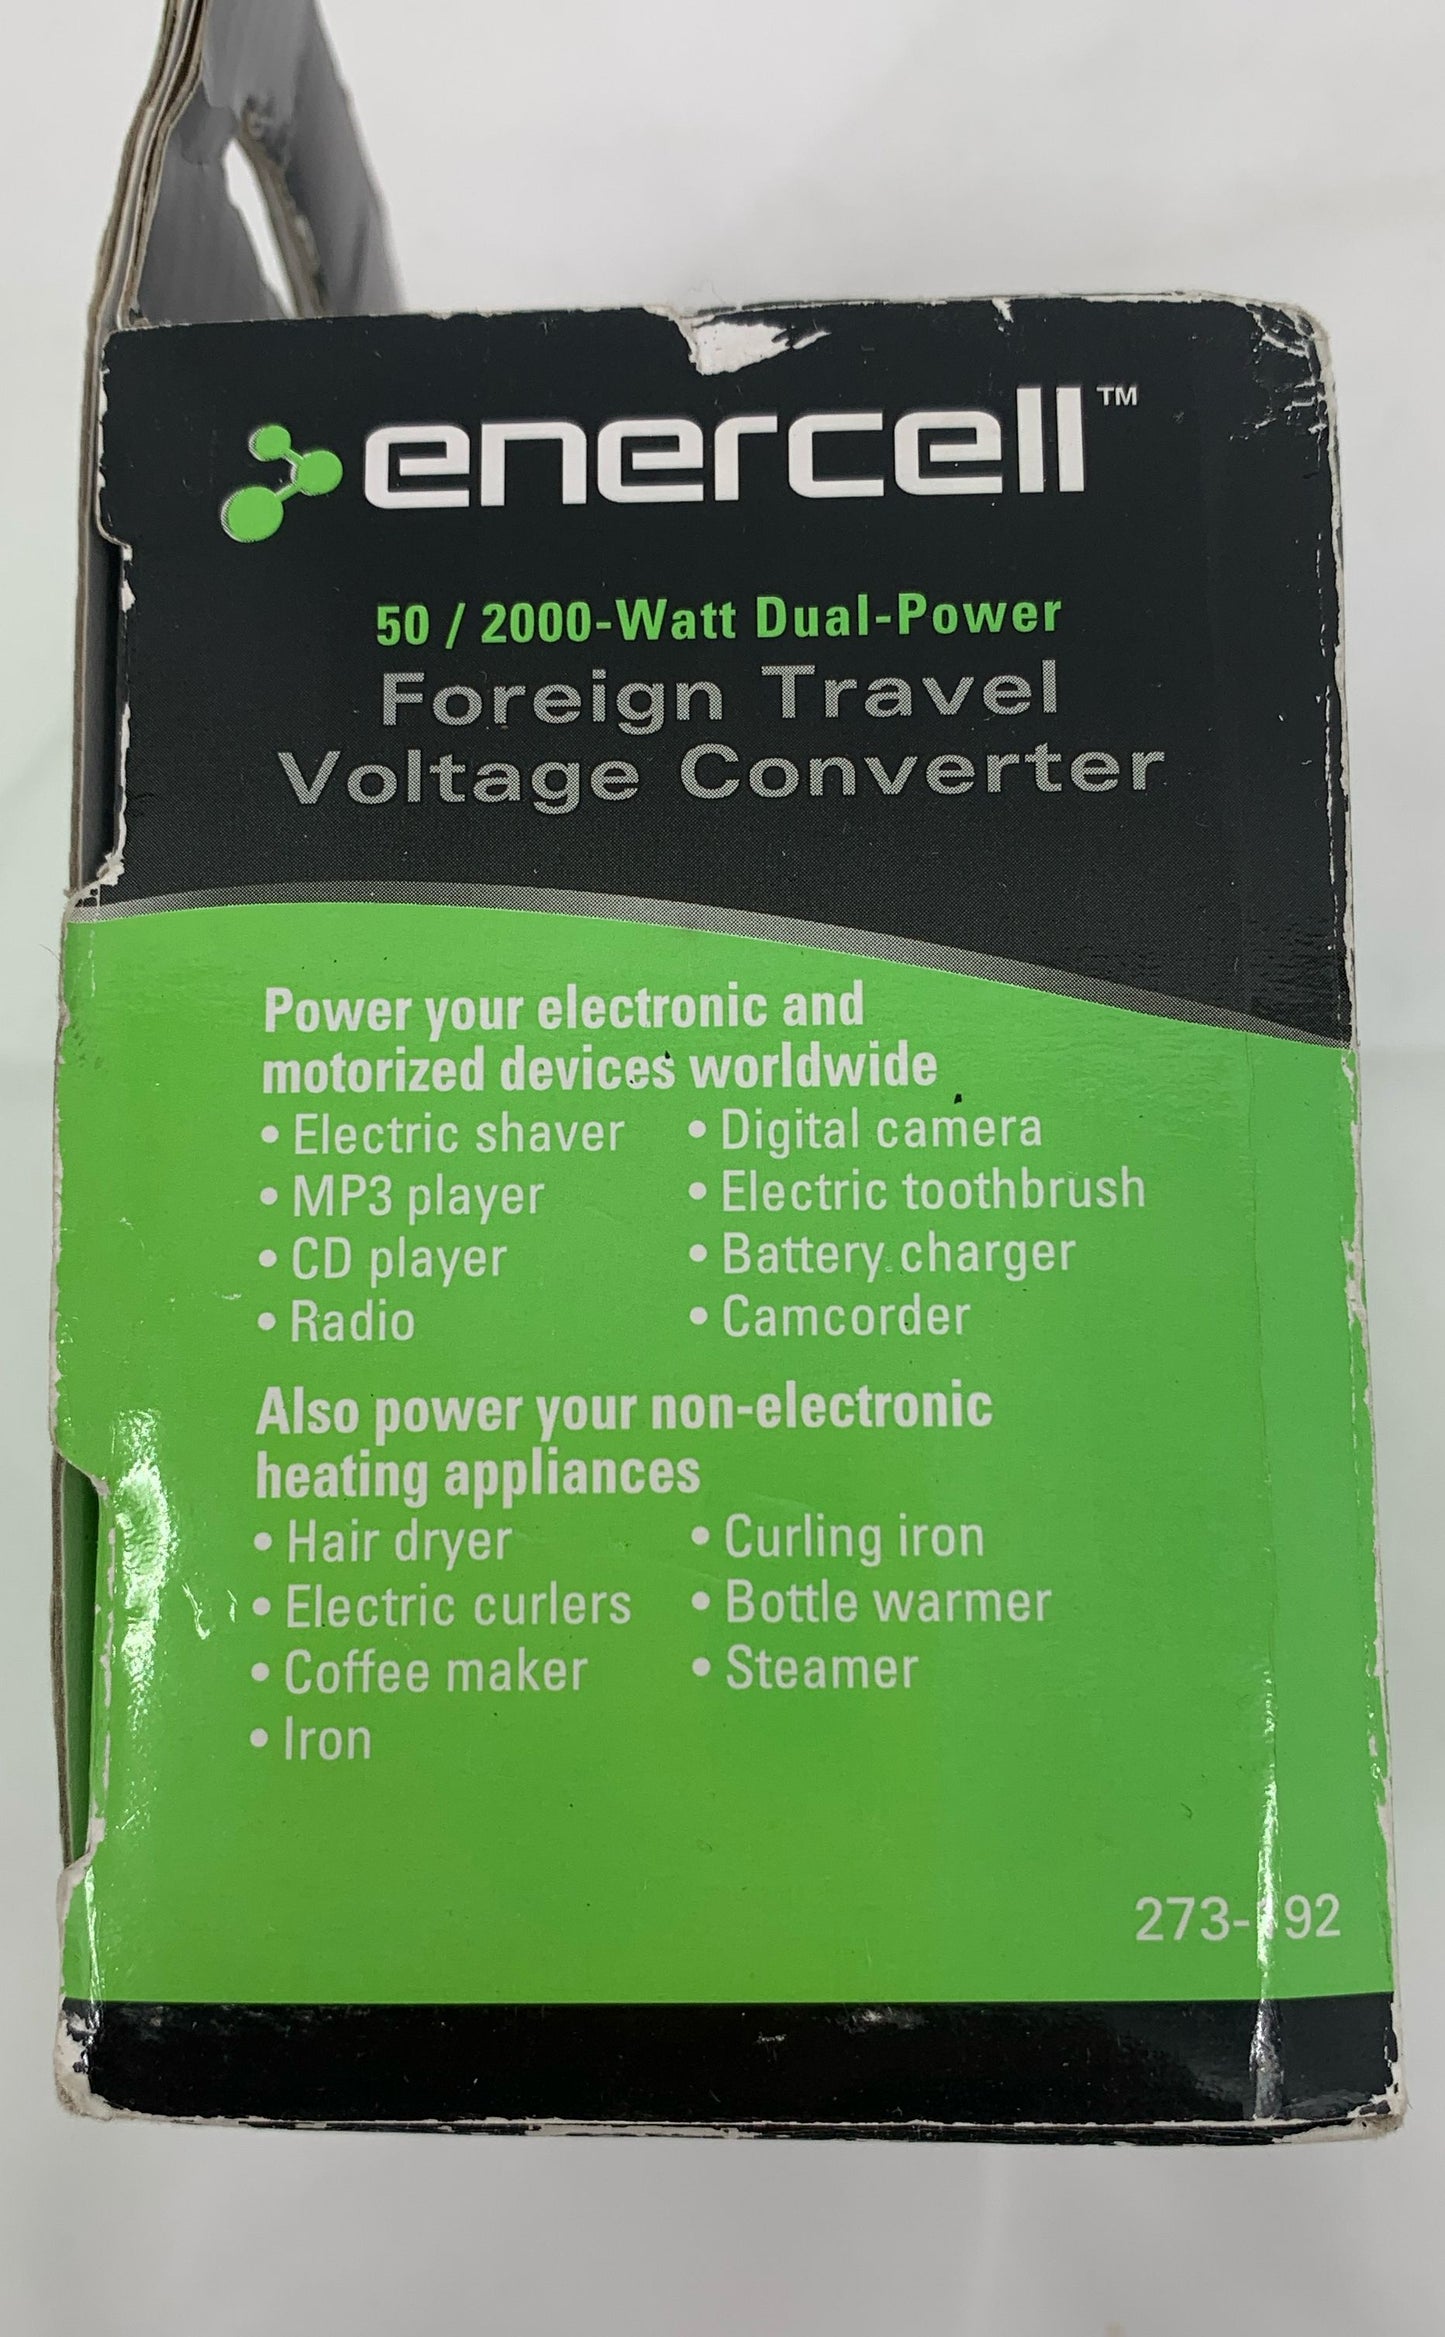 New Enercell 50/2000 Watt Dual Power Foreign Travel Voltage Converter